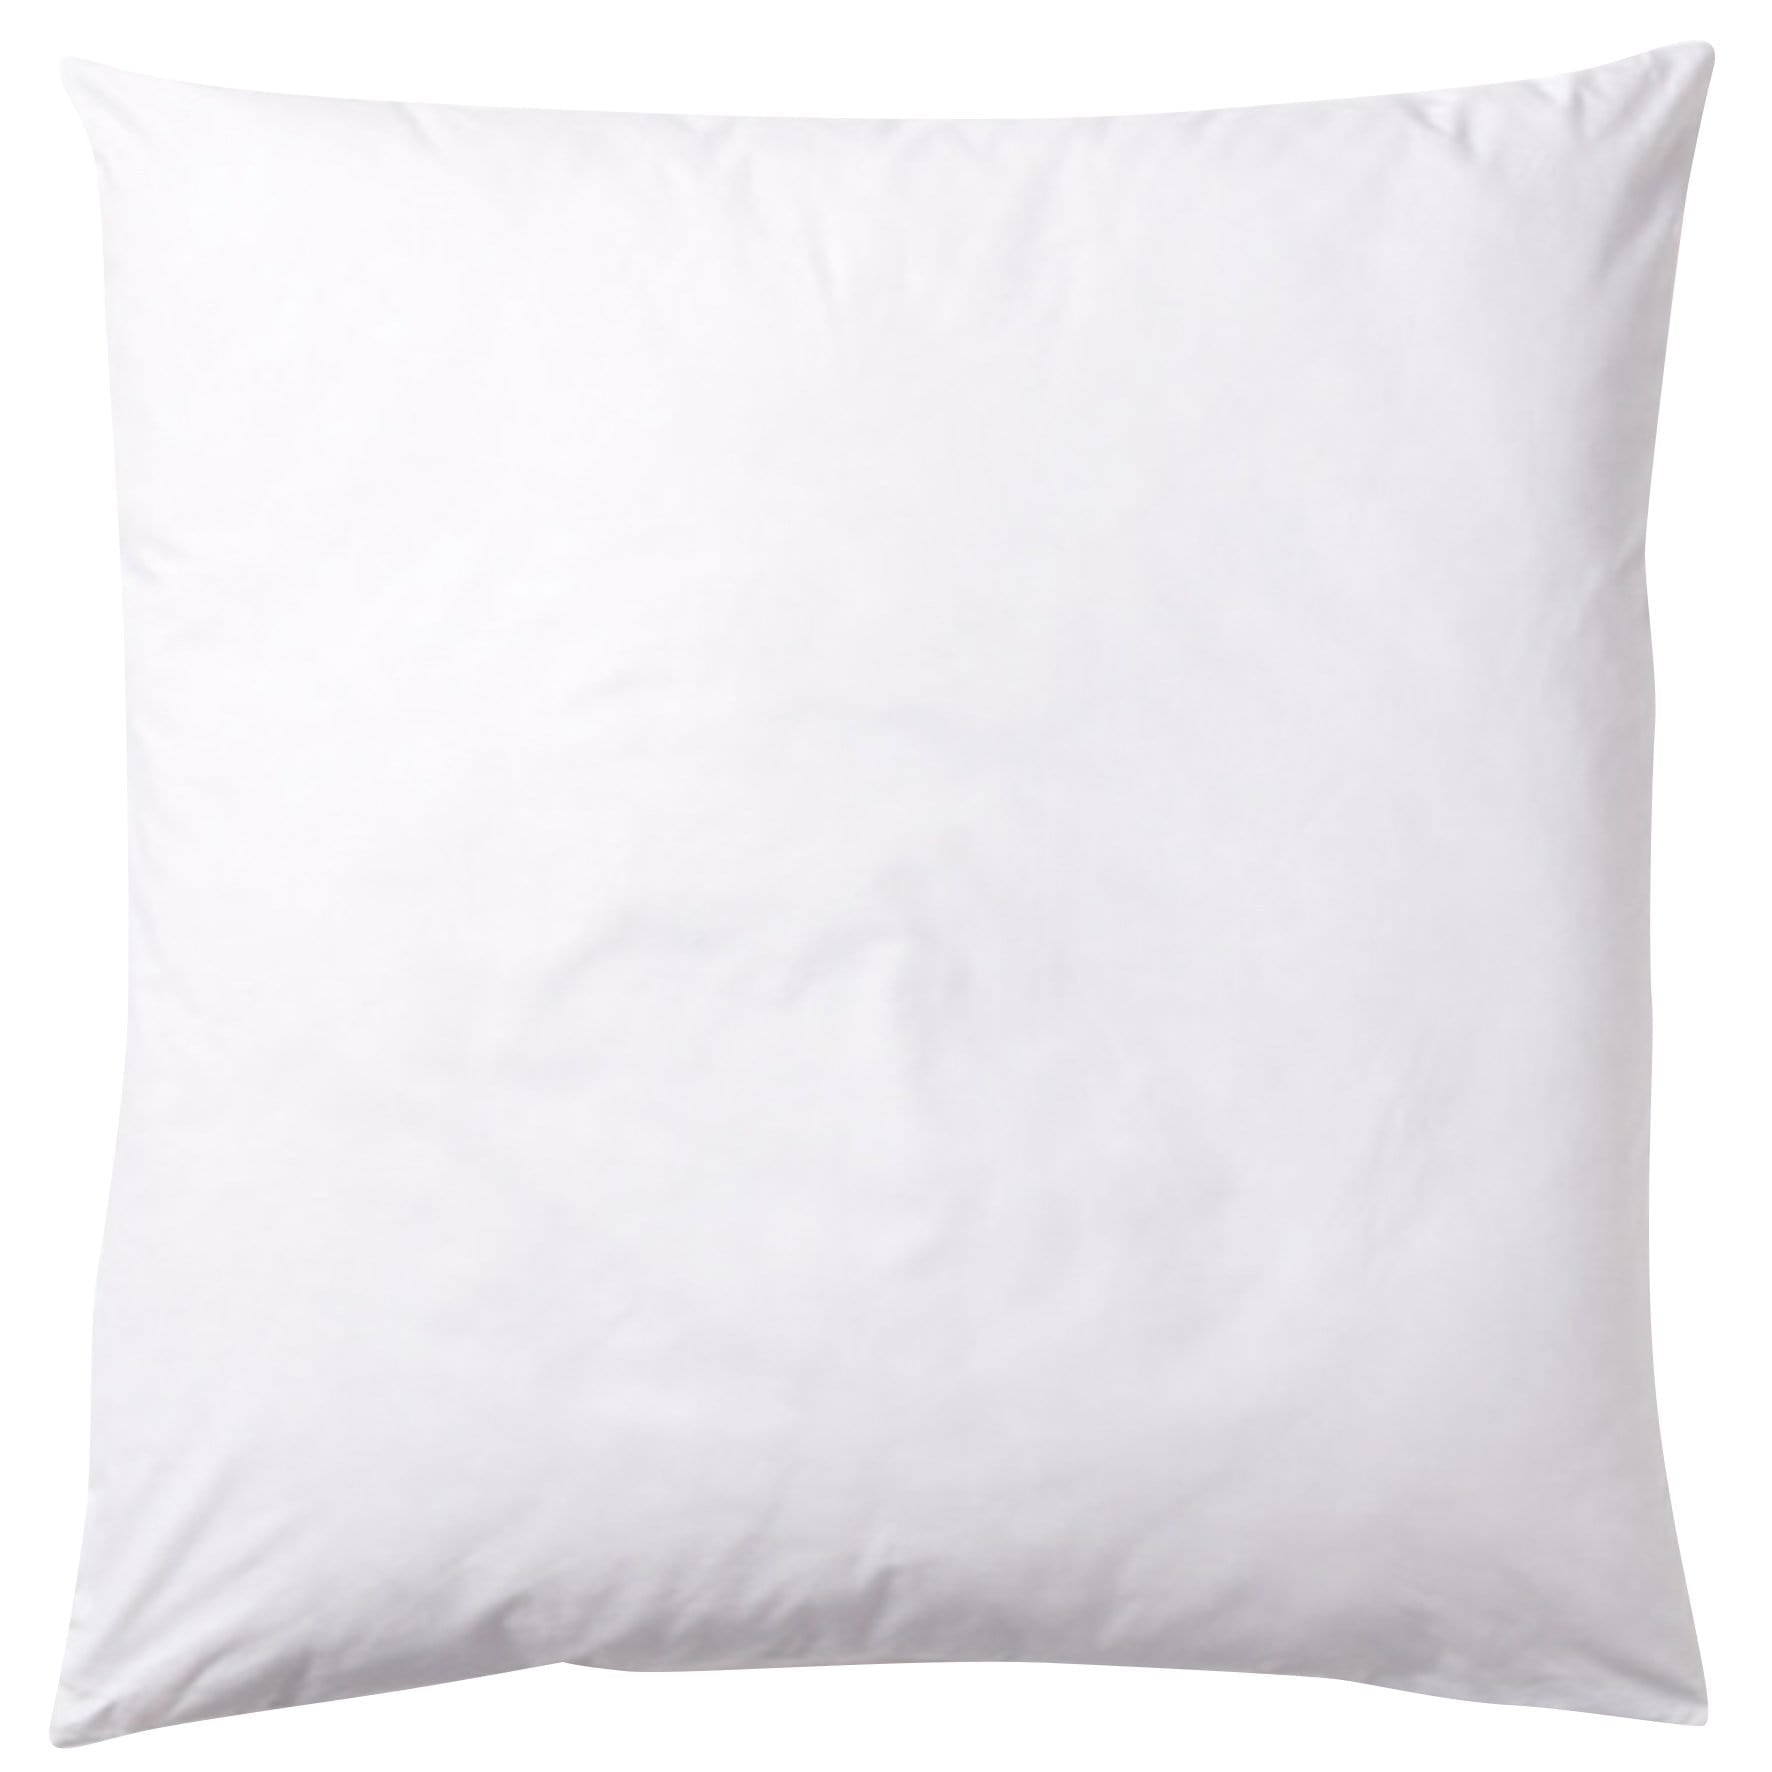 60x60 Feather Cushion Inner to fit a 55x55 Cushion Cover